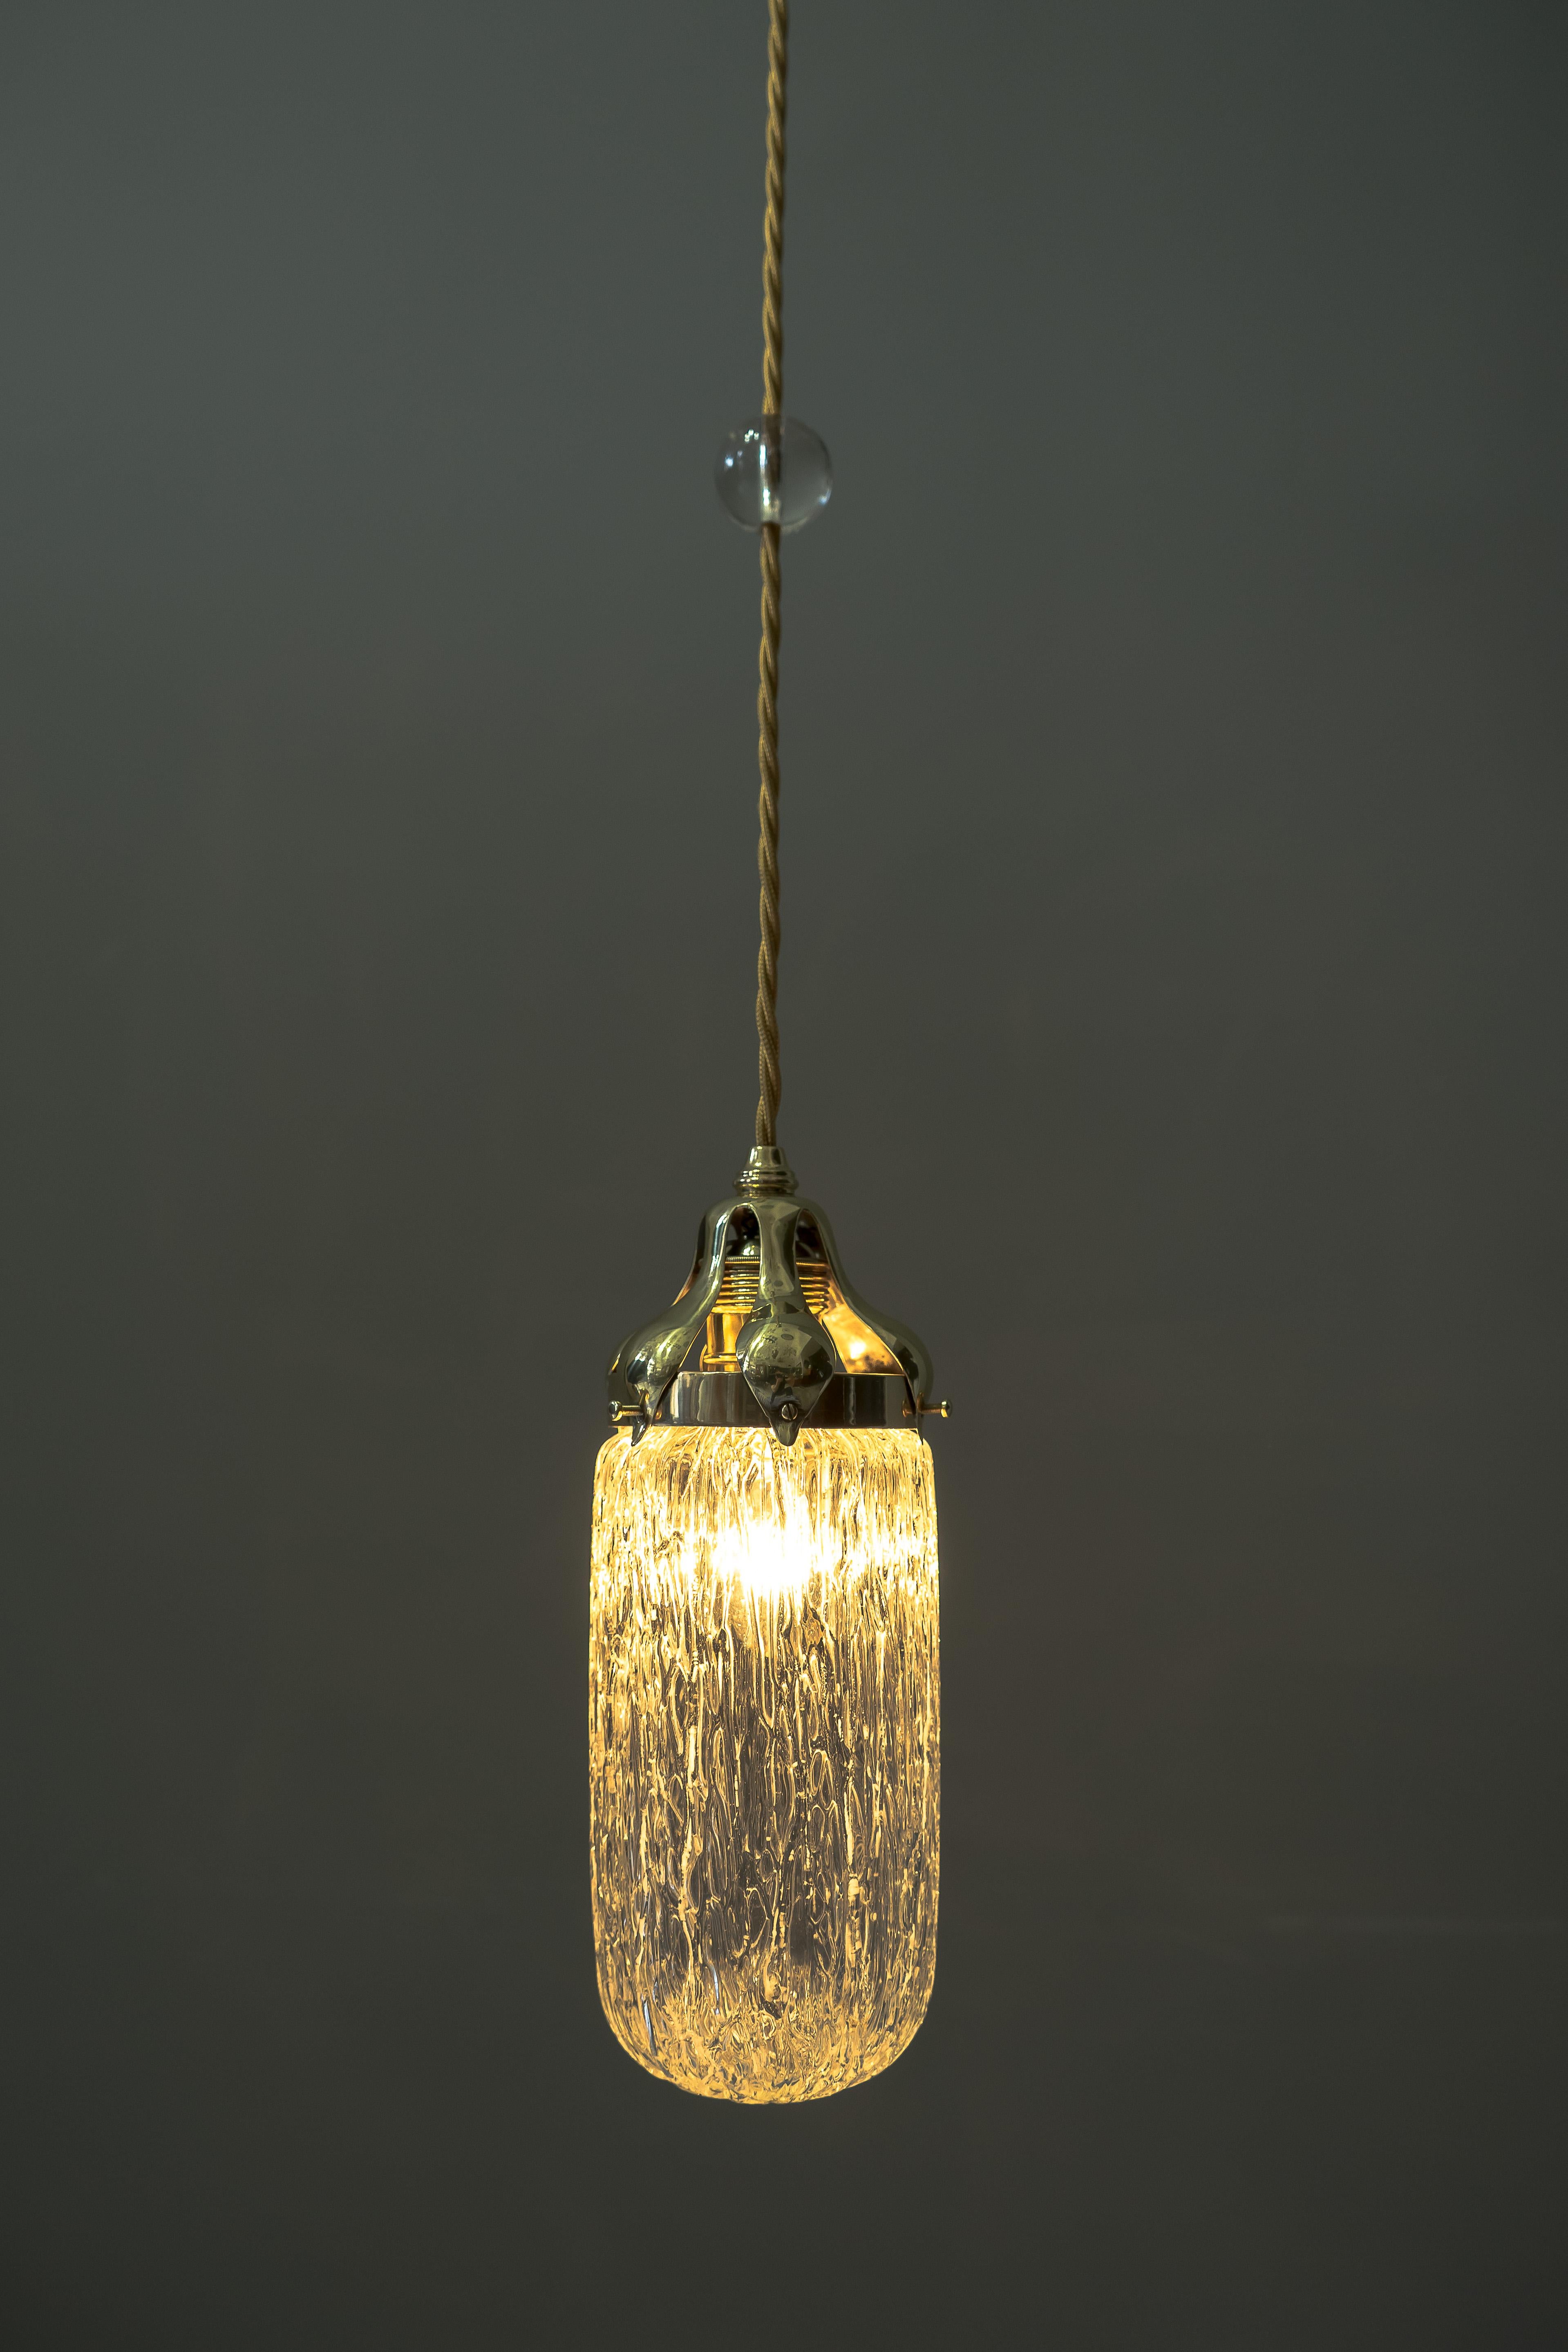 Leopold Bauer Hanging Lamp with Loetz Witwe “Blitzglas” Shade, circa 1905 For Sale 1